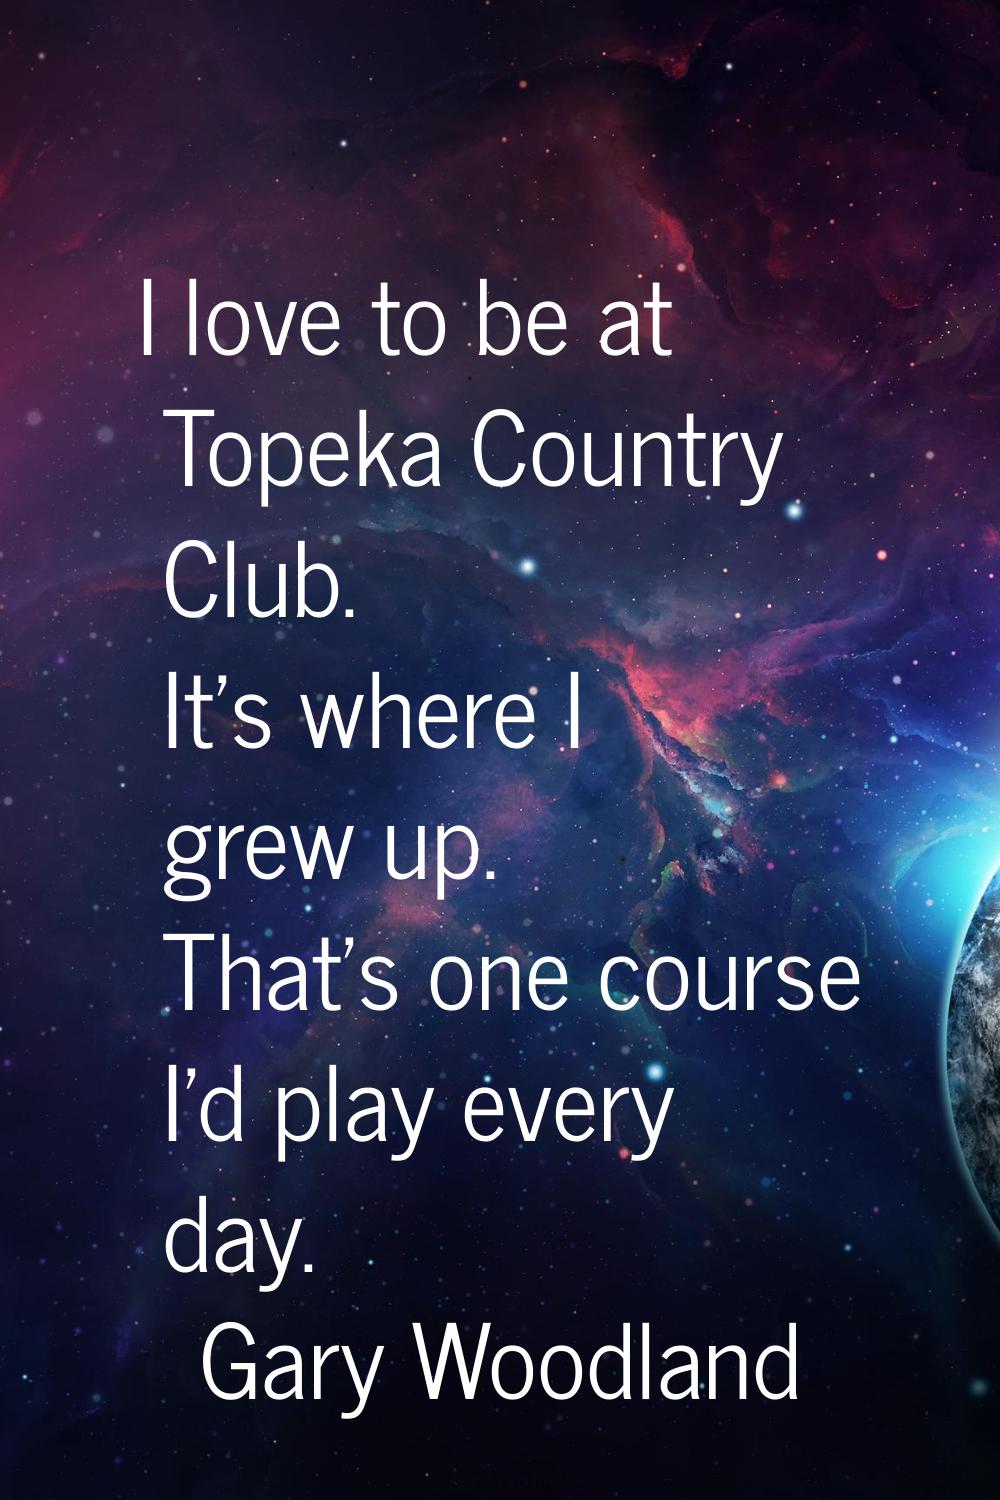 I love to be at Topeka Country Club. It's where I grew up. That's one course I'd play every day.